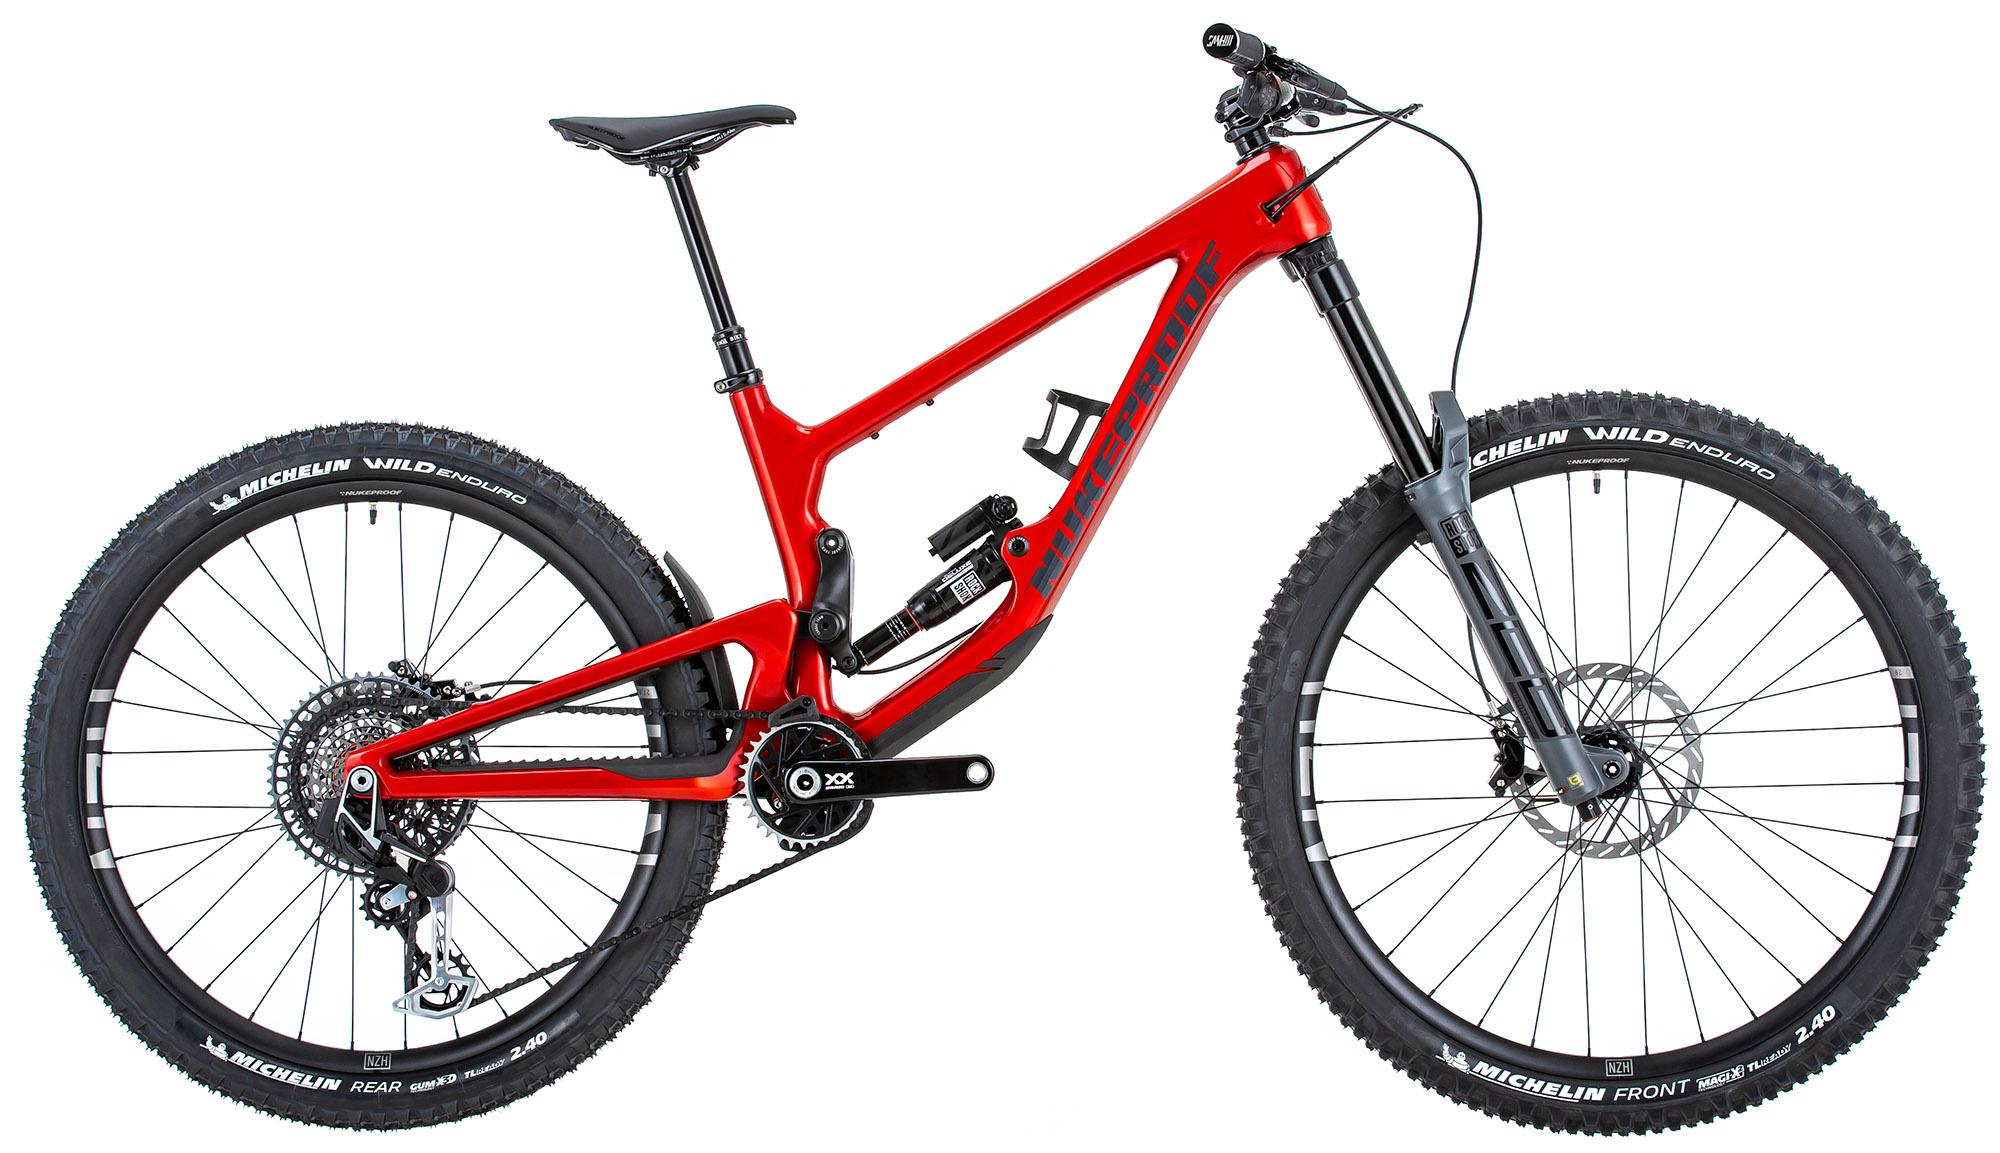 Nukeproof Giga 297 Rs Carbon Mountain Bike (xx Eagle Trans) - Racing Red